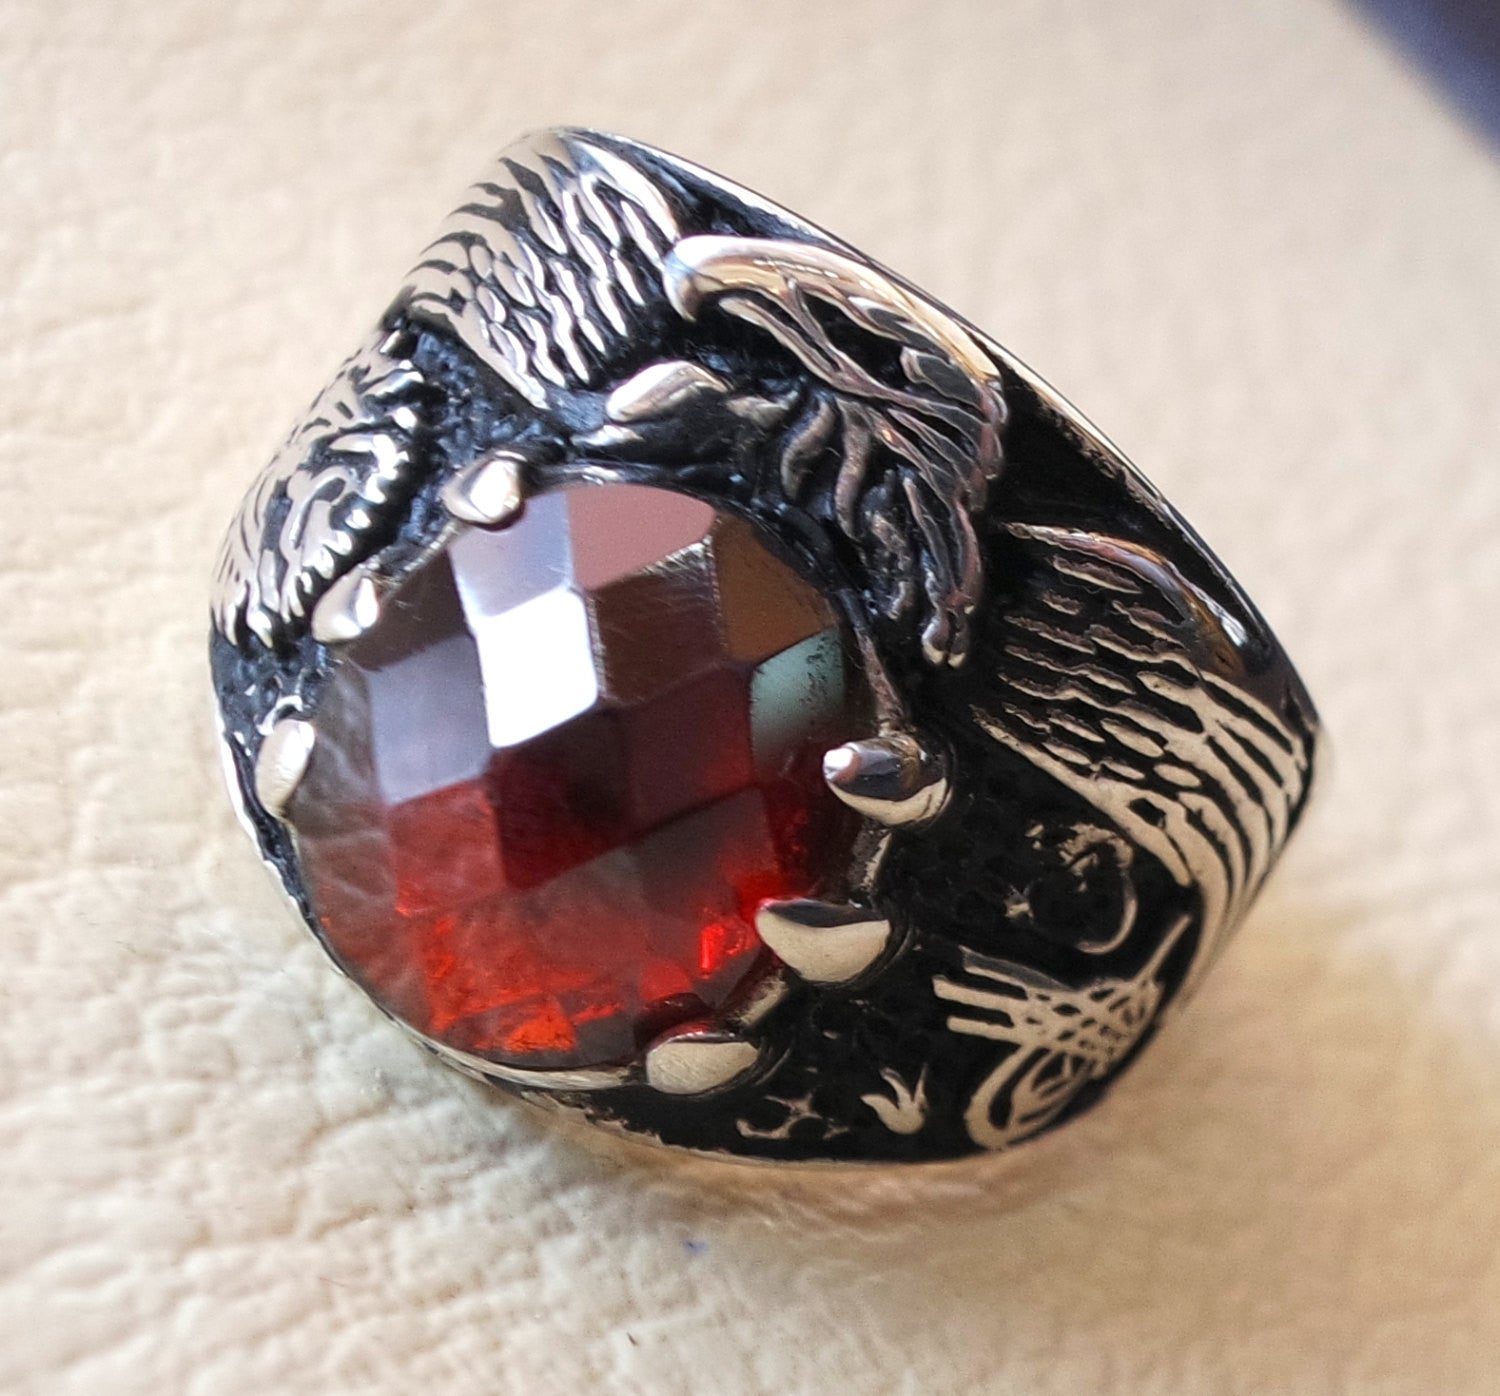 red ruby imitation oval stone arabic men ring sterling silver 925 eagle arabic ottoman symbols turkish jewelry style all sizes fast shipping